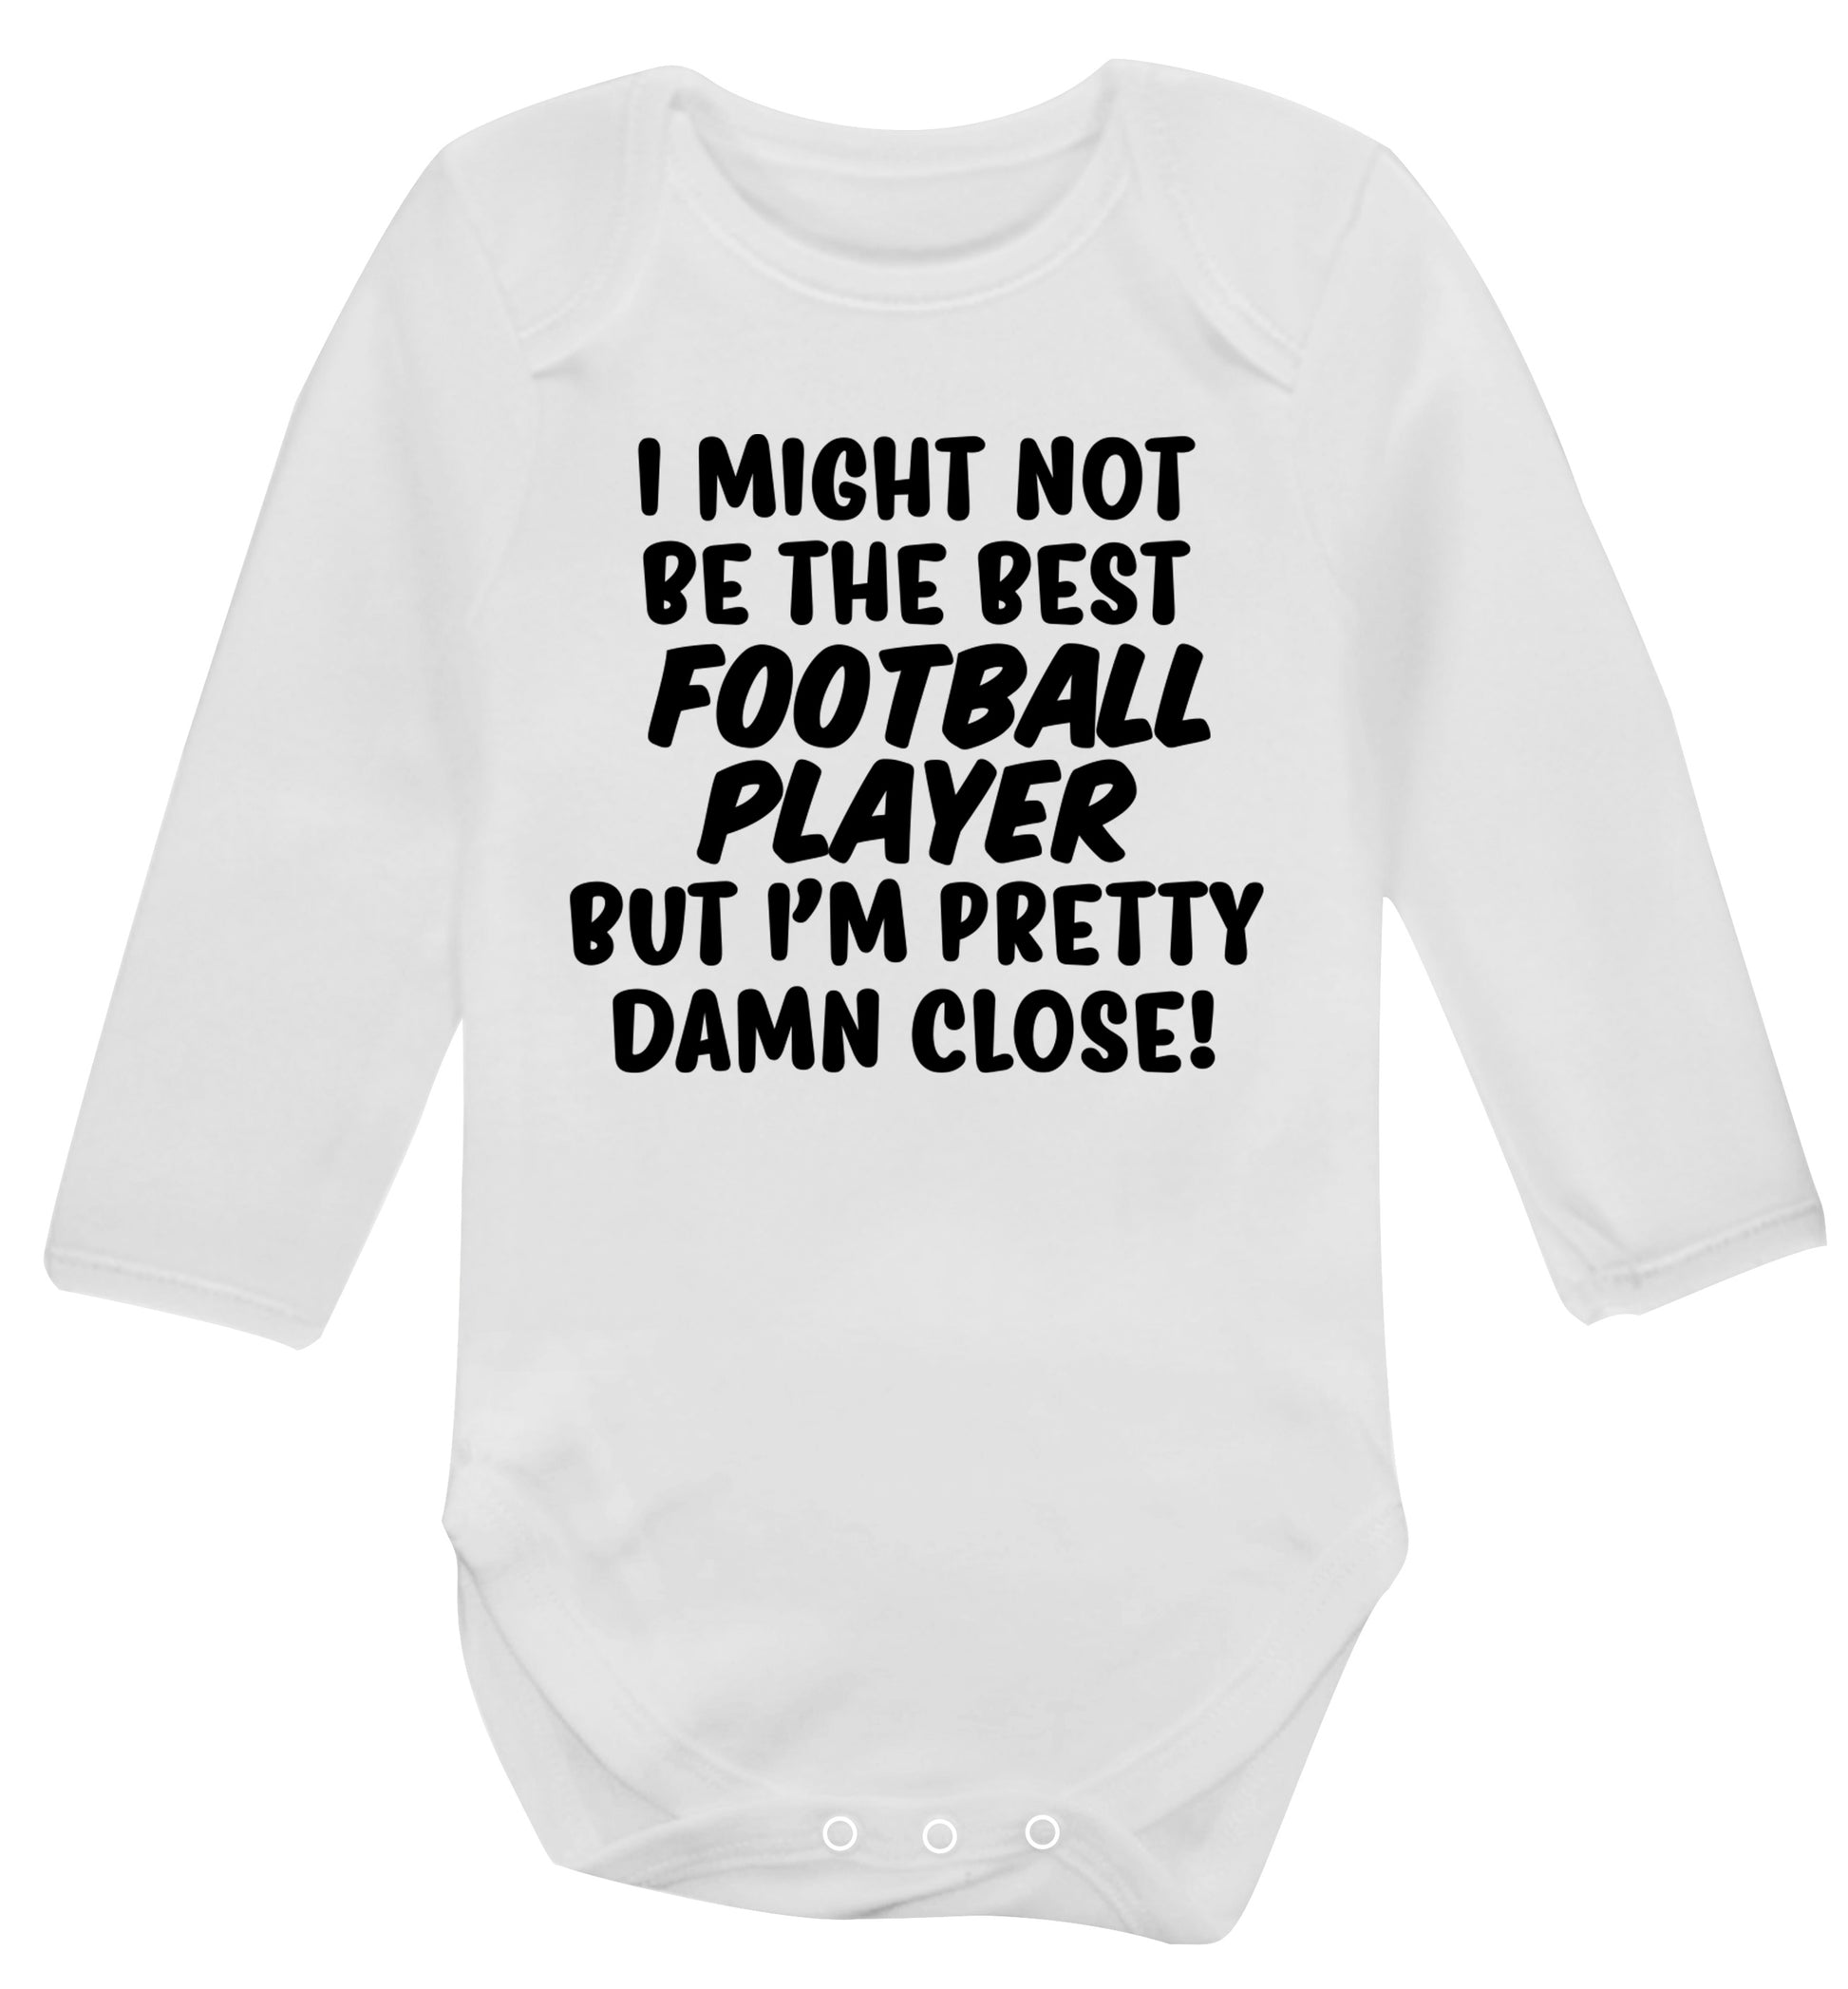 I might not be the best football player but I'm pretty close! Baby Vest long sleeved white 6-12 months